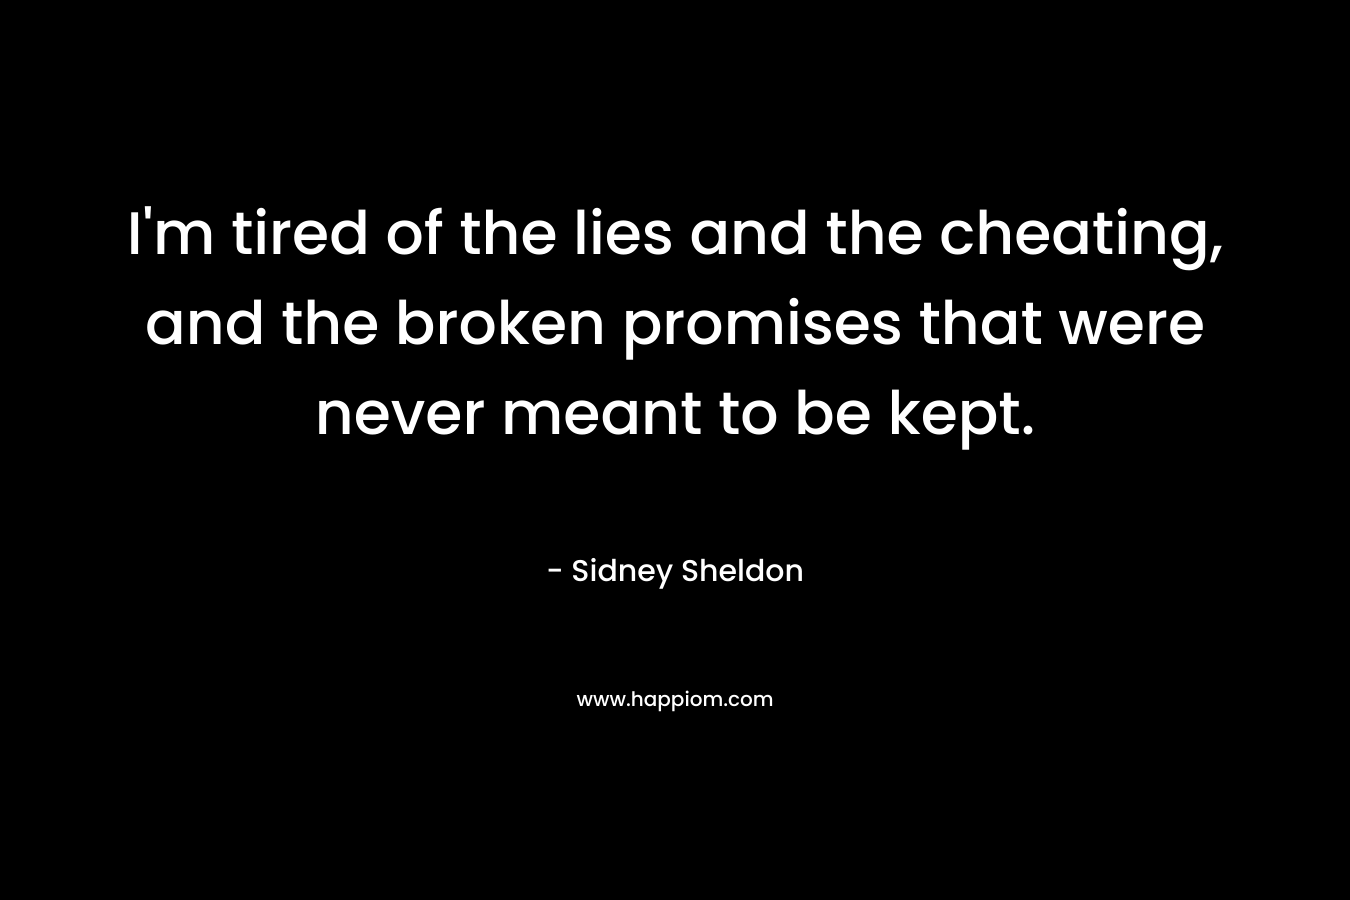 I’m tired of the lies and the cheating, and the broken promises that were never meant to be kept. – Sidney Sheldon